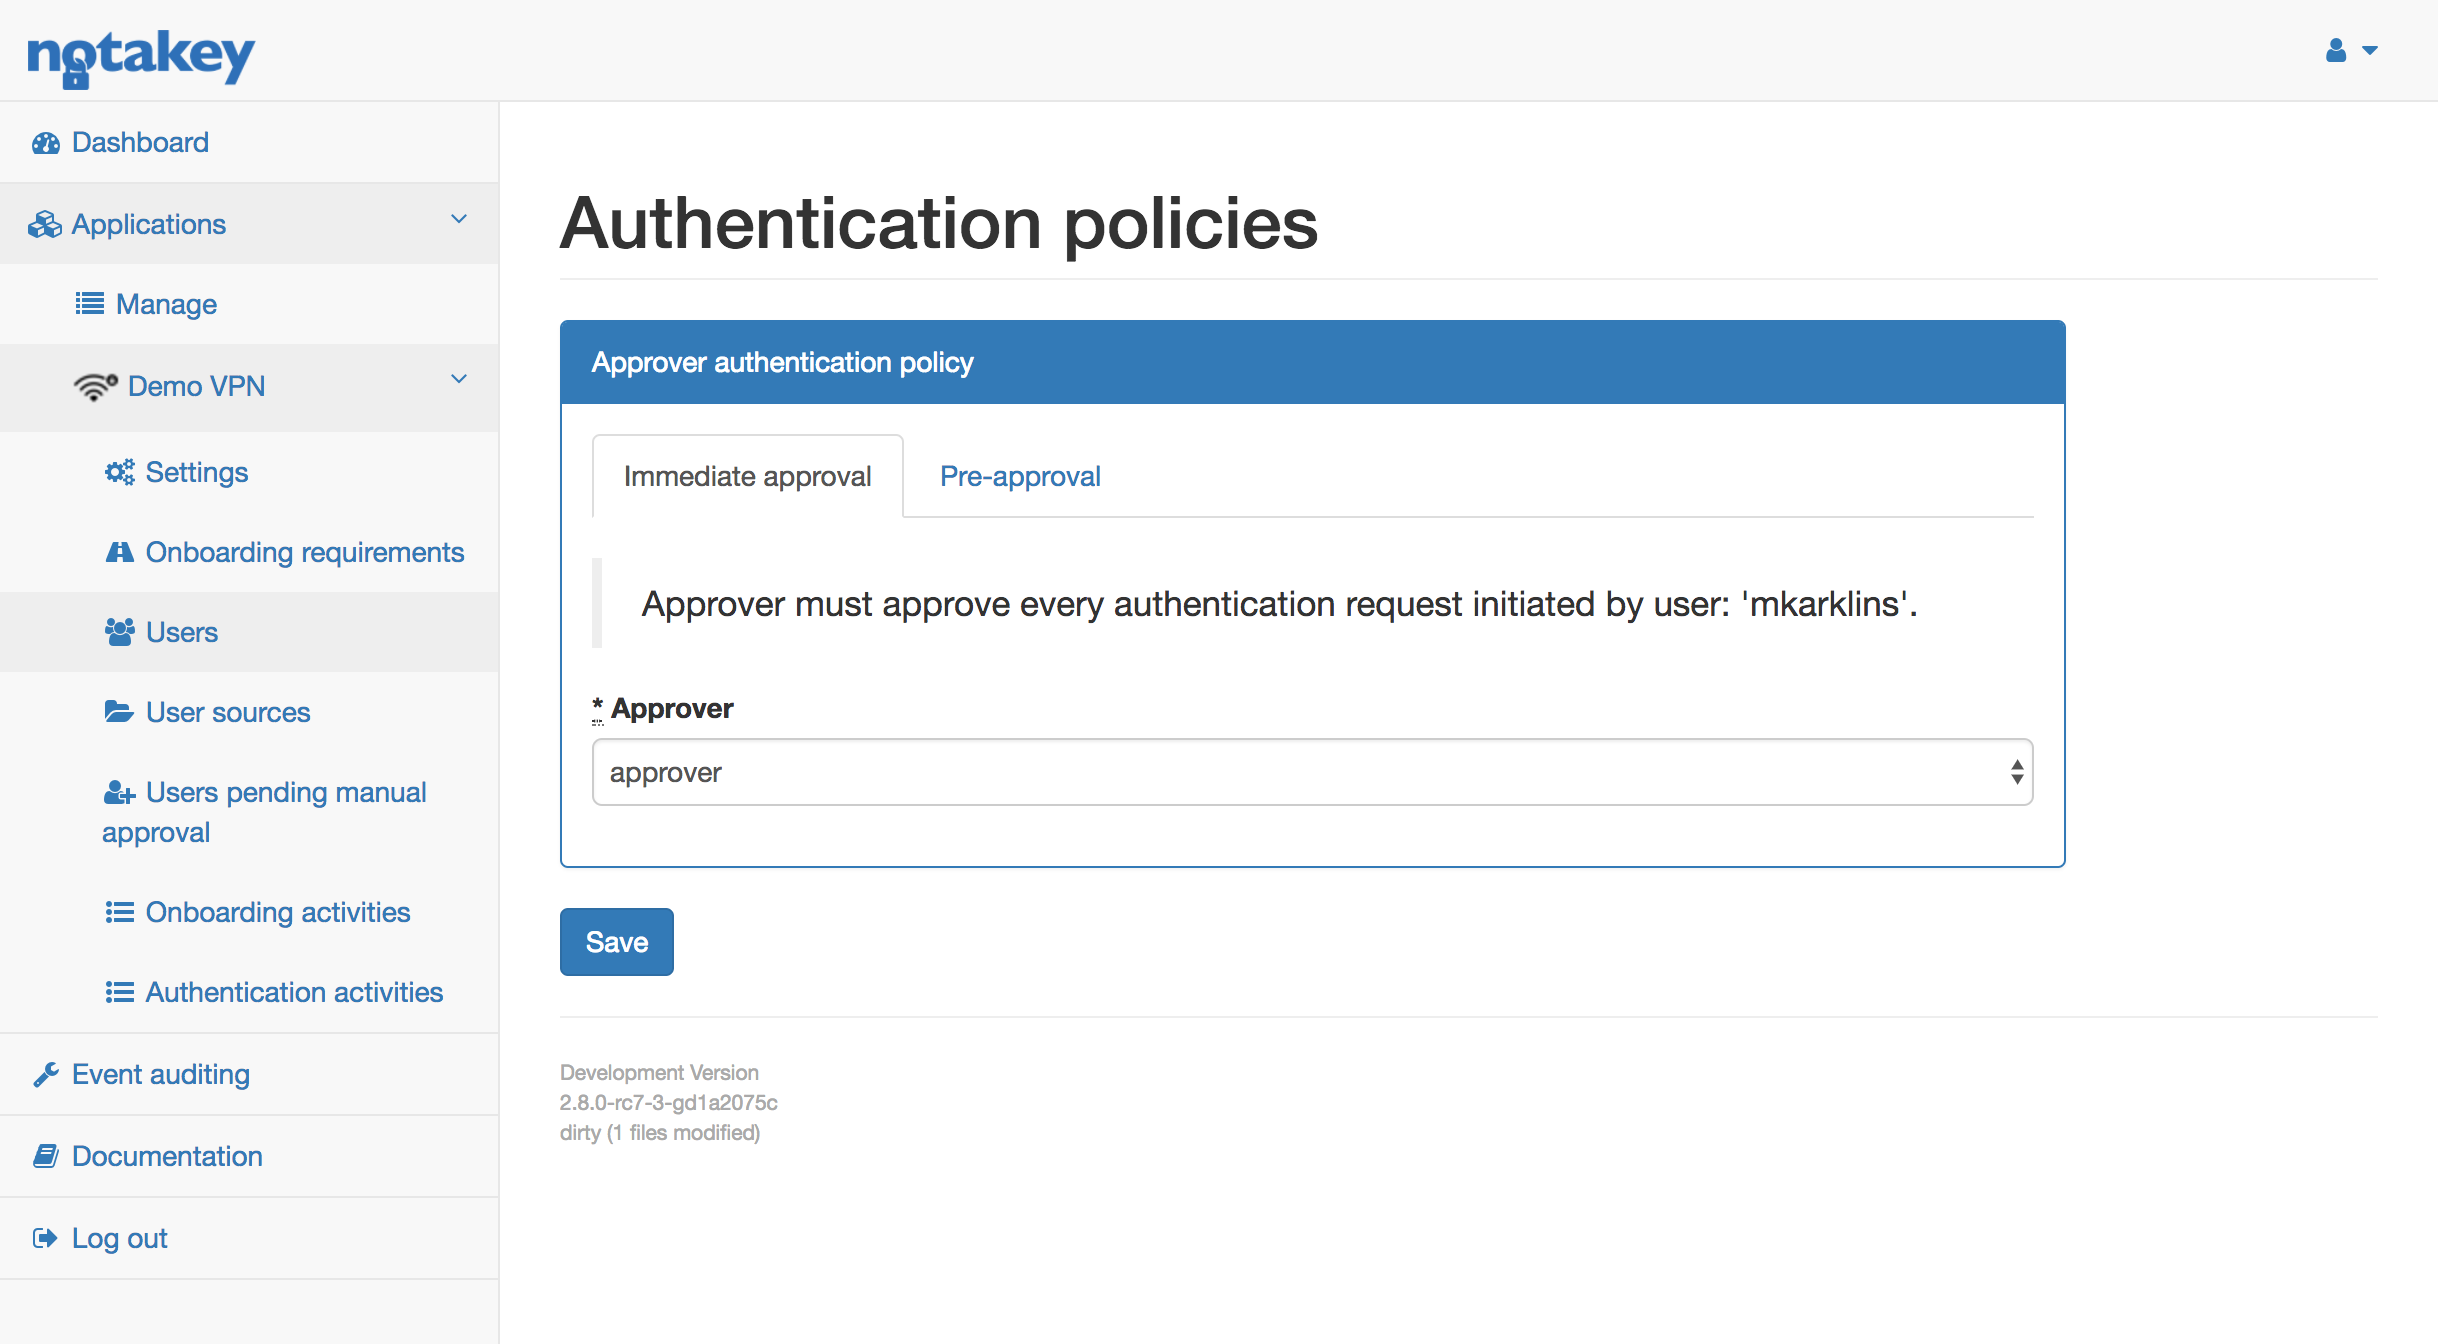 New immediate approval authentication policy